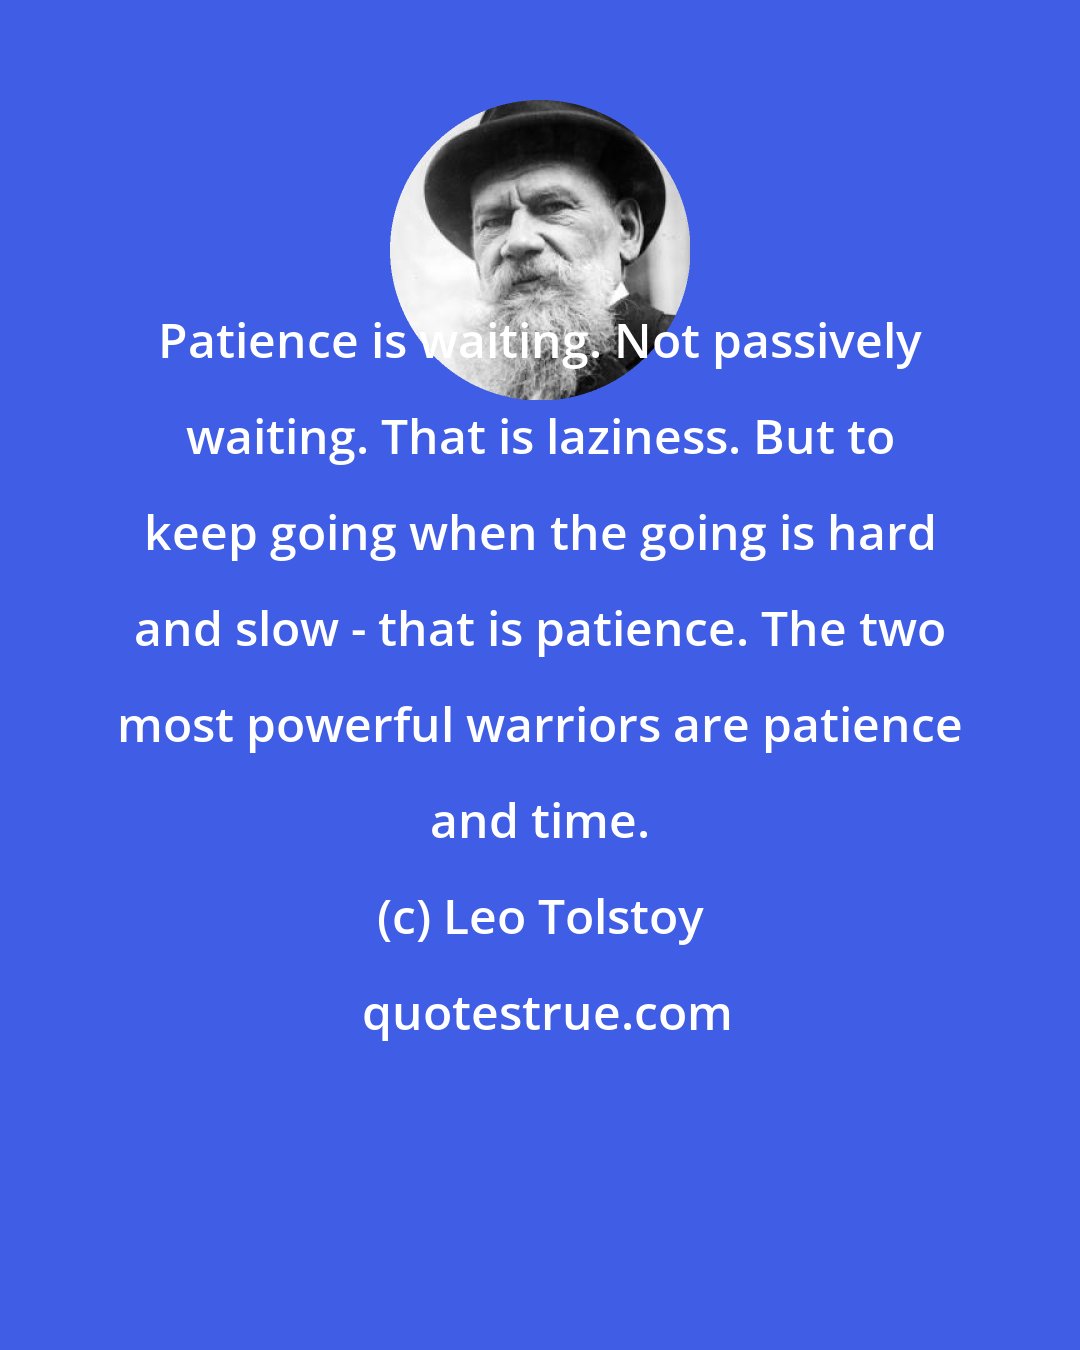 Leo Tolstoy: Patience is waiting. Not passively waiting. That is laziness. But to keep going when the going is hard and slow - that is patience. The two most powerful warriors are patience and time.